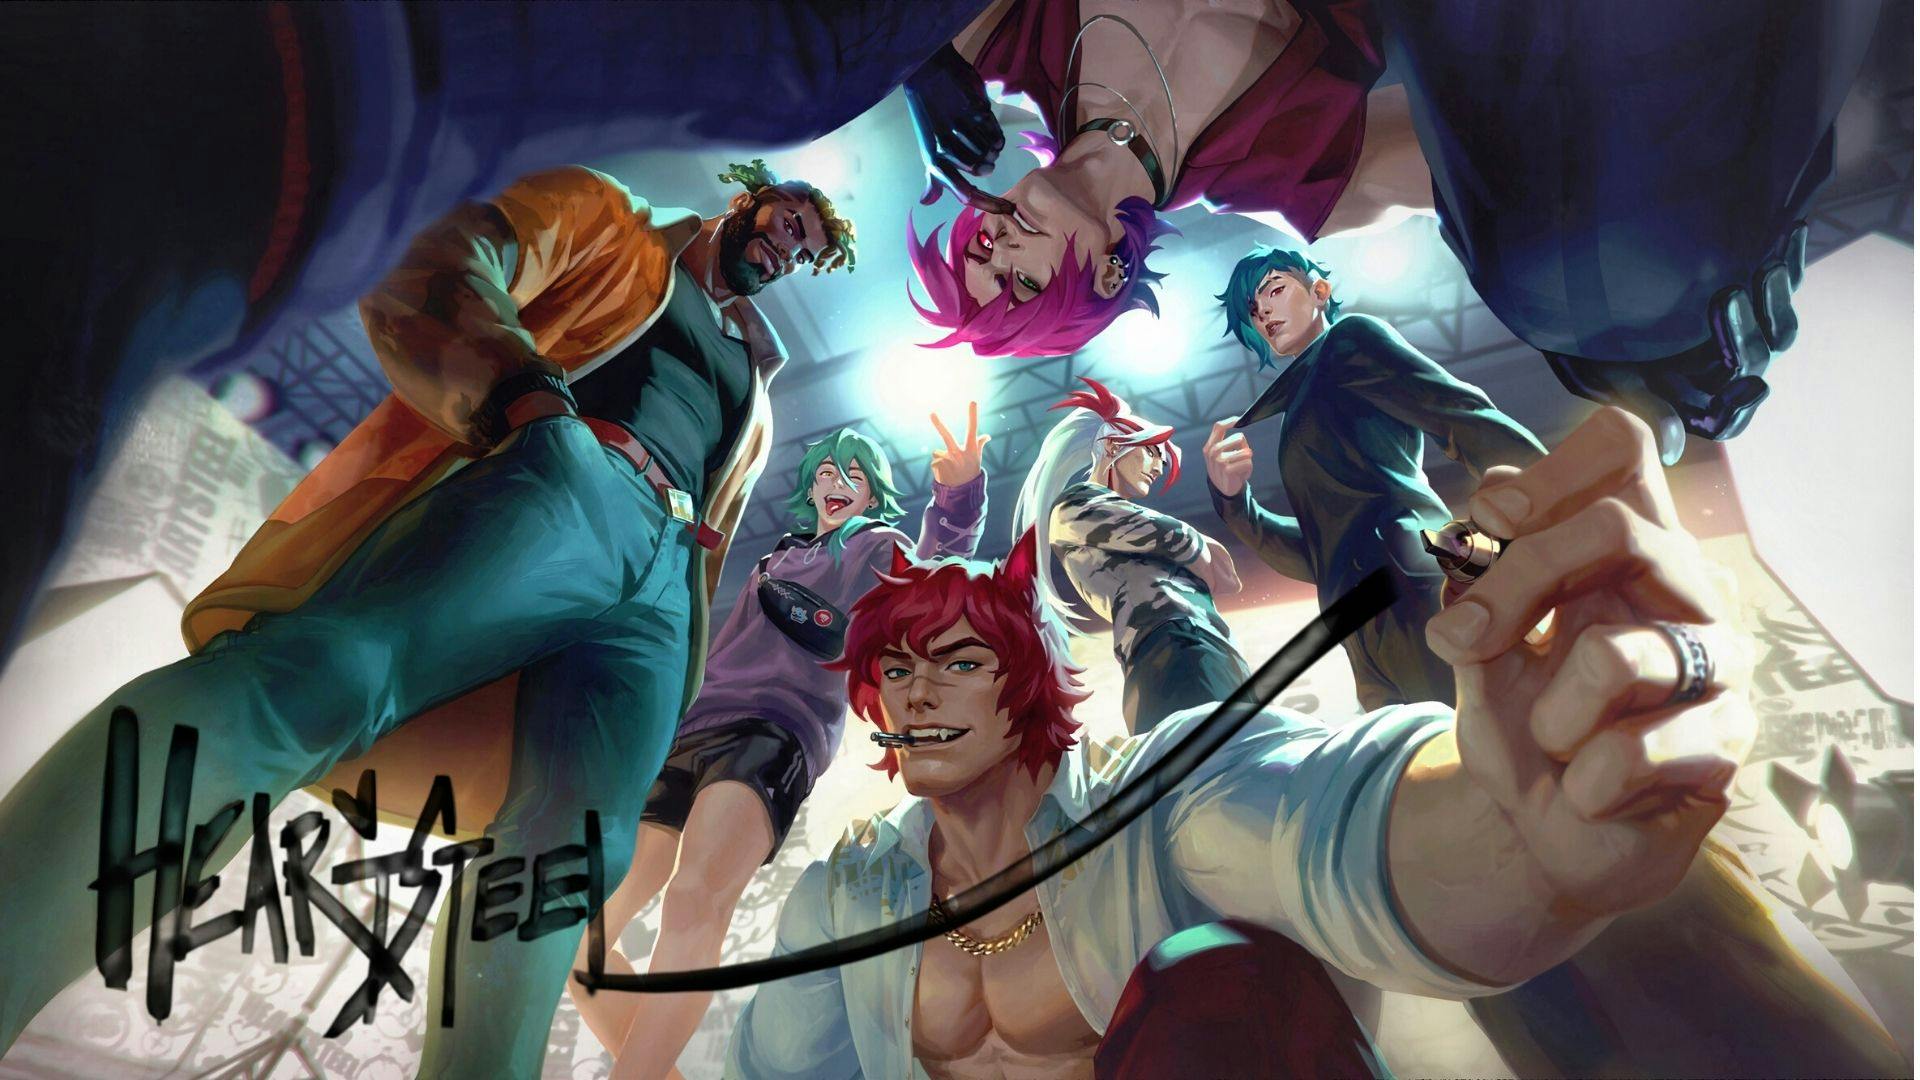 Arcane and Among Us collaboration: Release date, champions